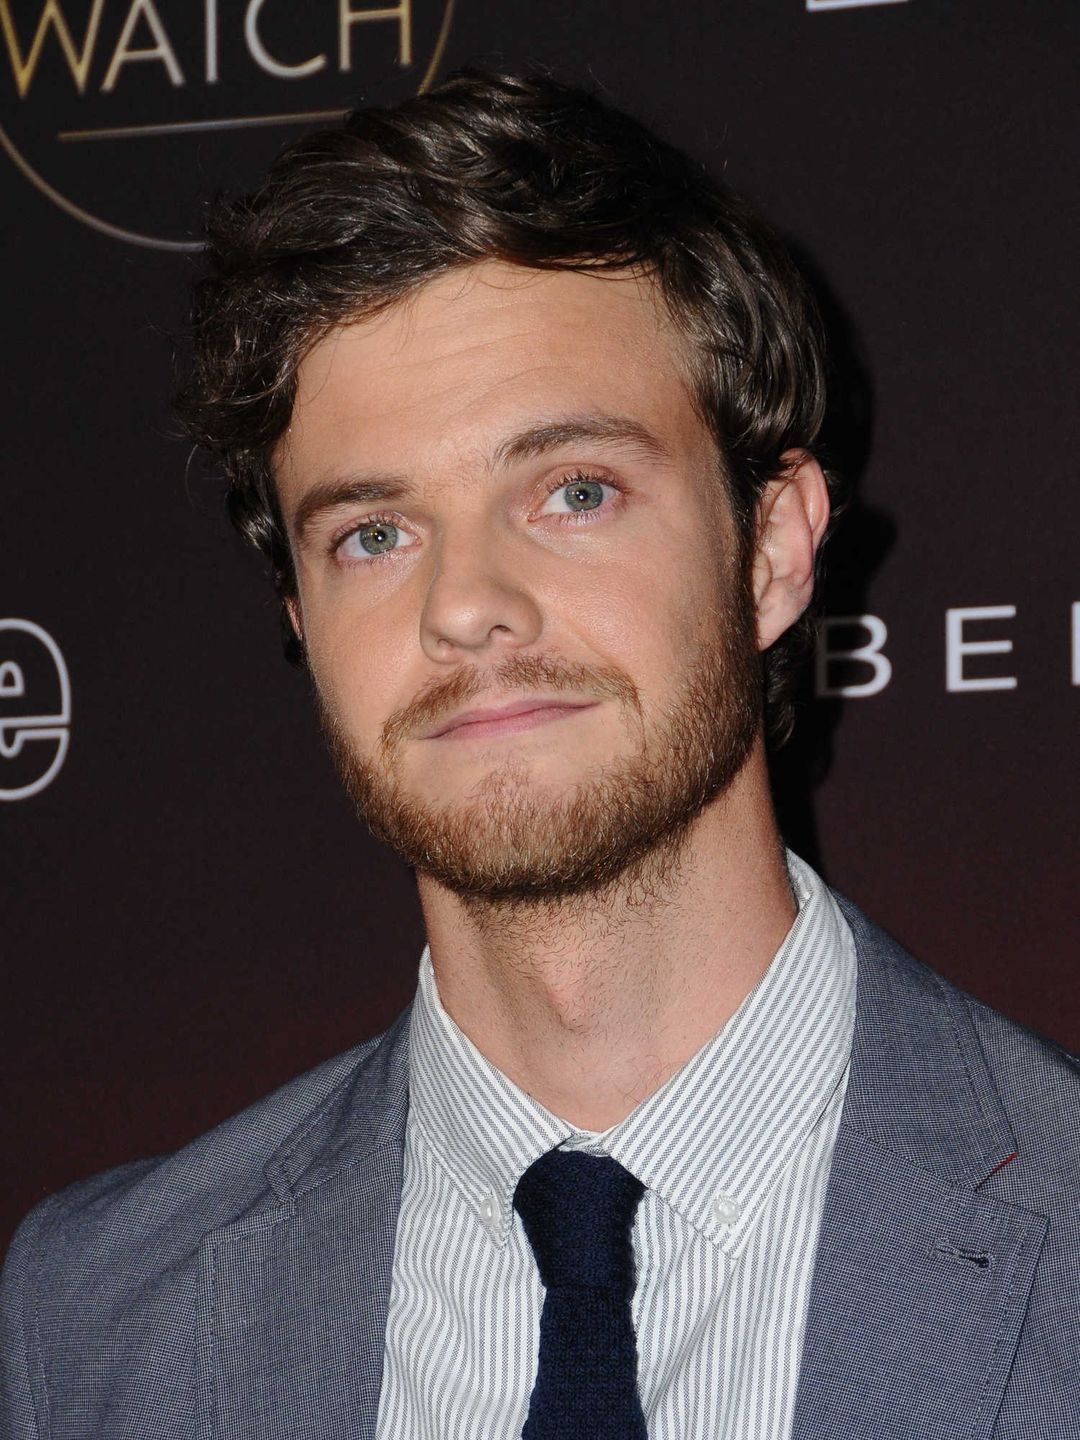 Jack Quaid does he have a wife